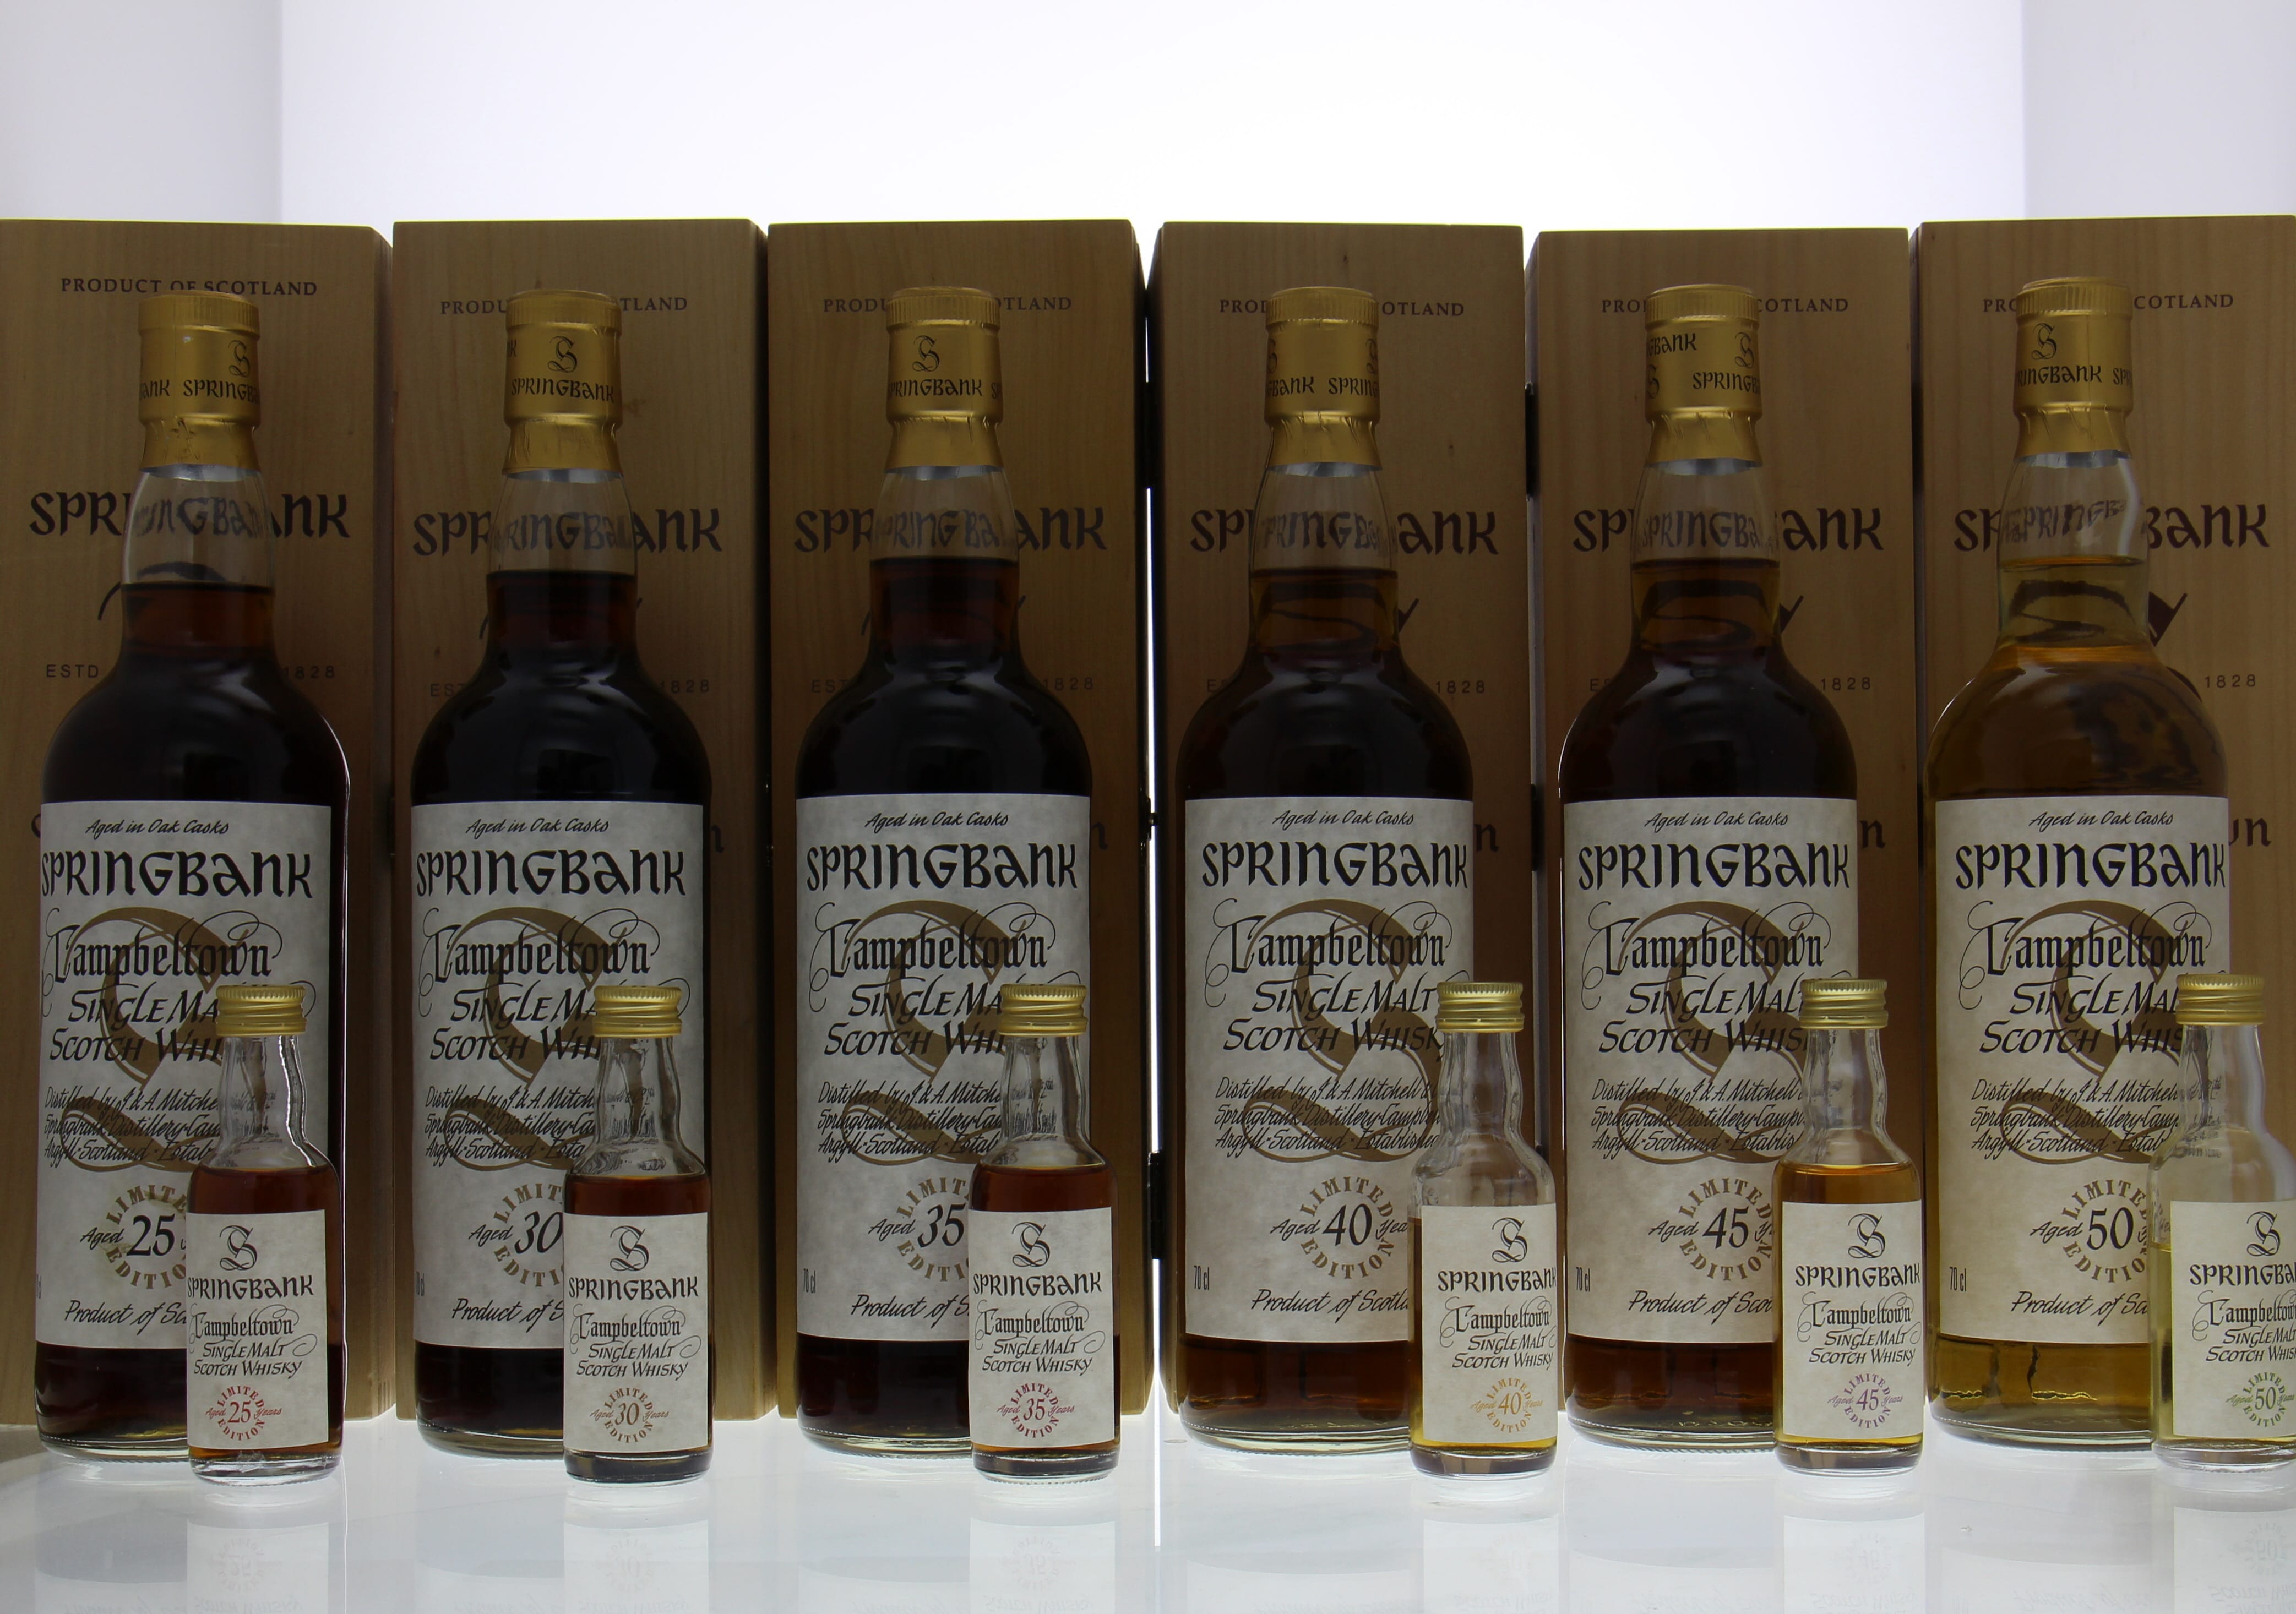 Springbank - Millenium Limited Edtion Full Set 25-30-35-40-45-50 Years Old With The Millenium Mini Set 46% selected